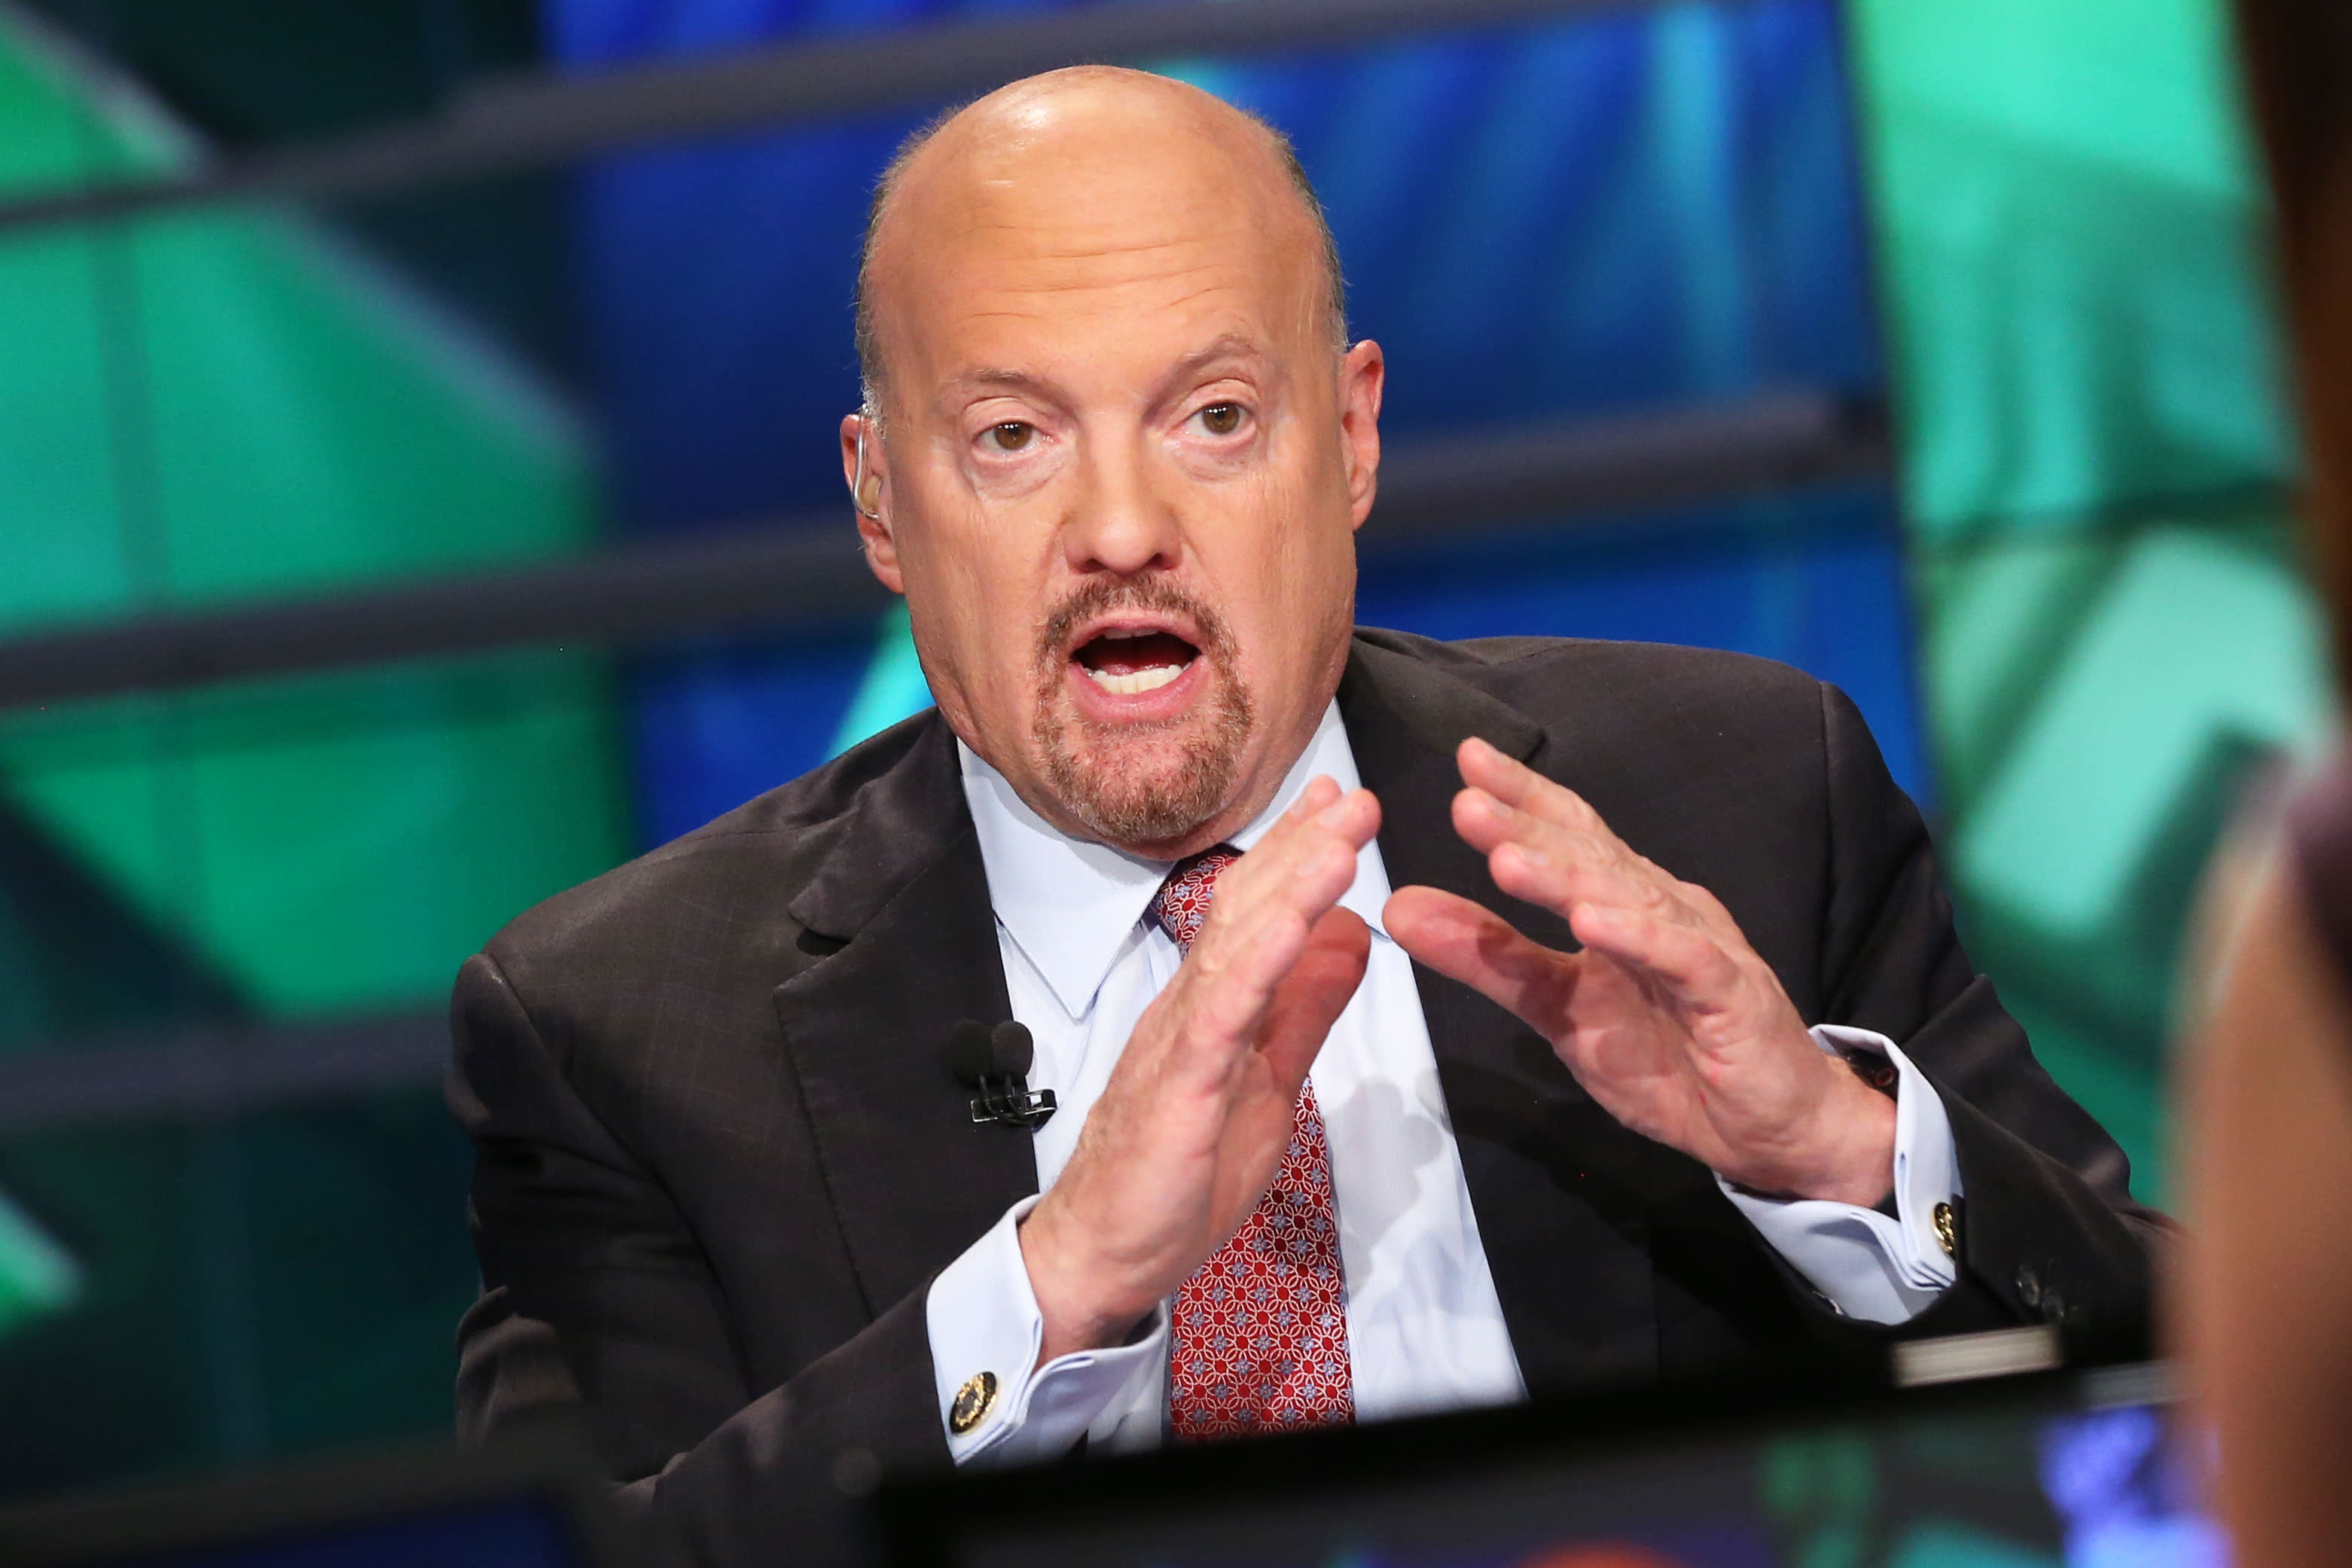 Cramer says market needs a 'total give up' to find a bottom and signal an all-clear to buyers